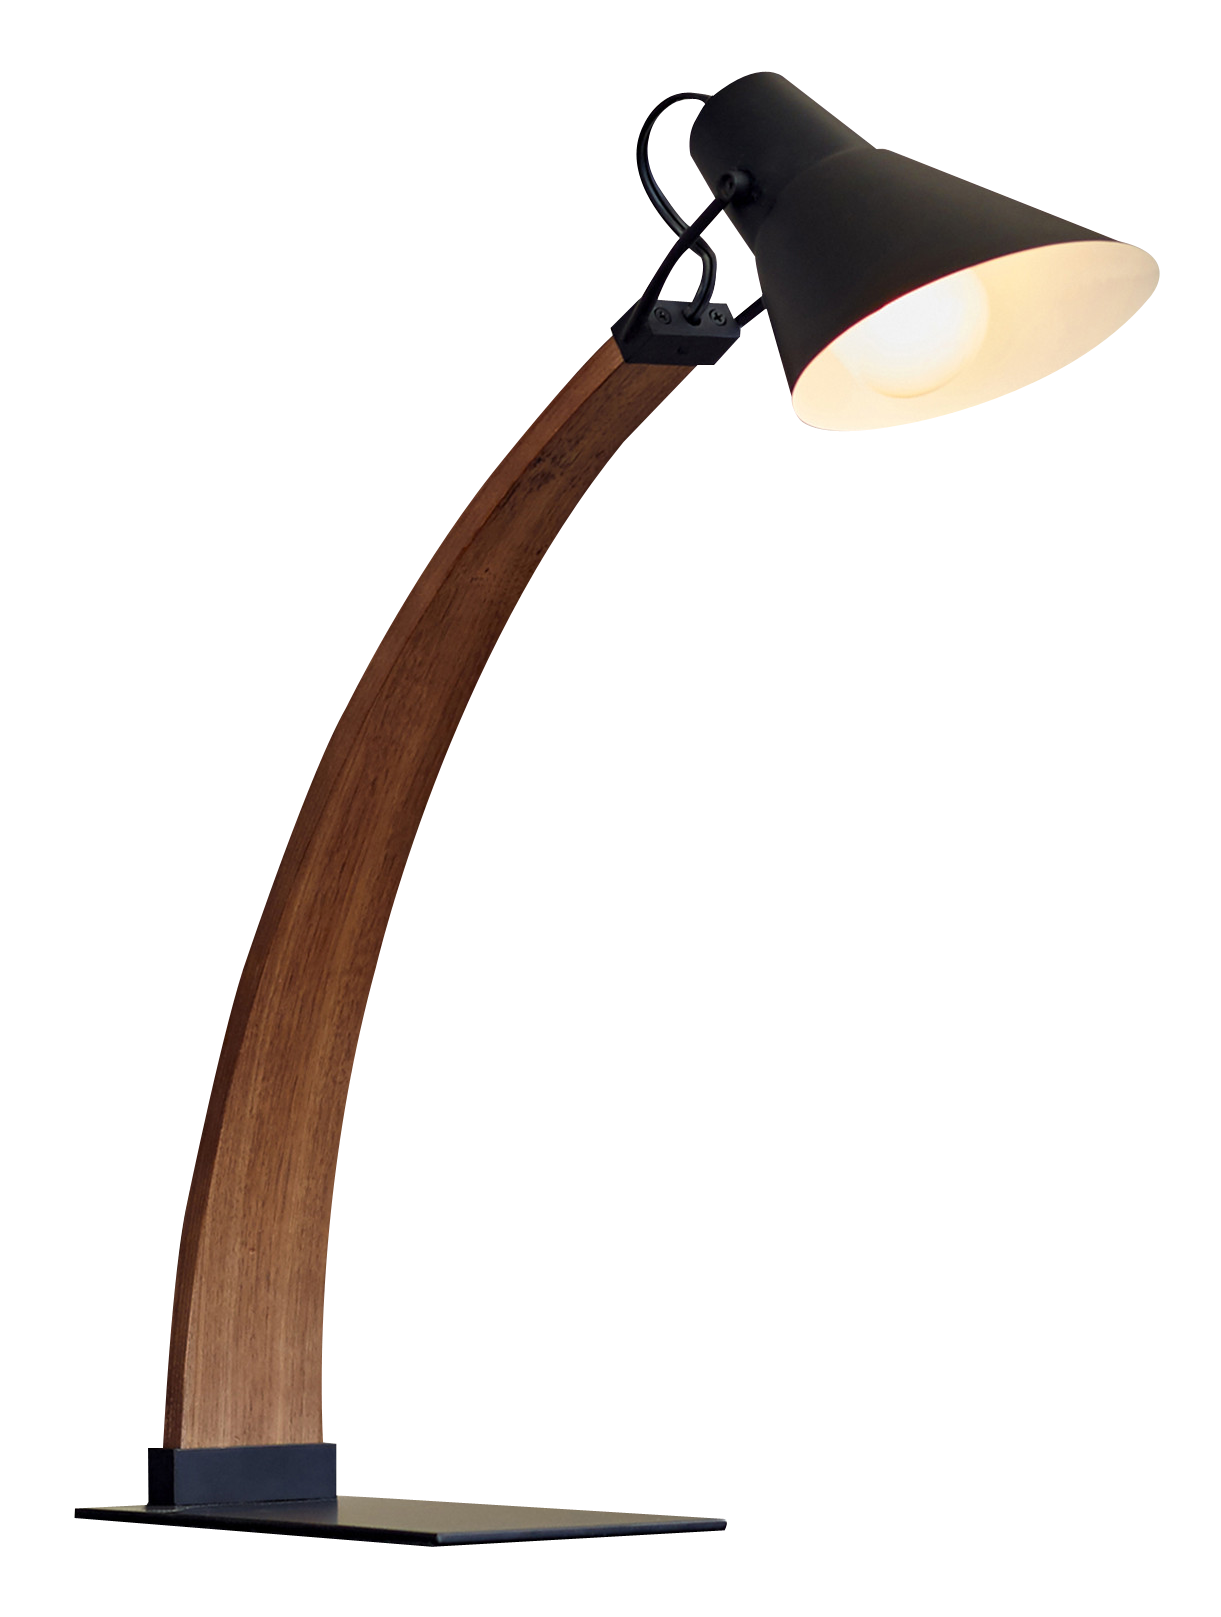 A Lamp On A Black Background